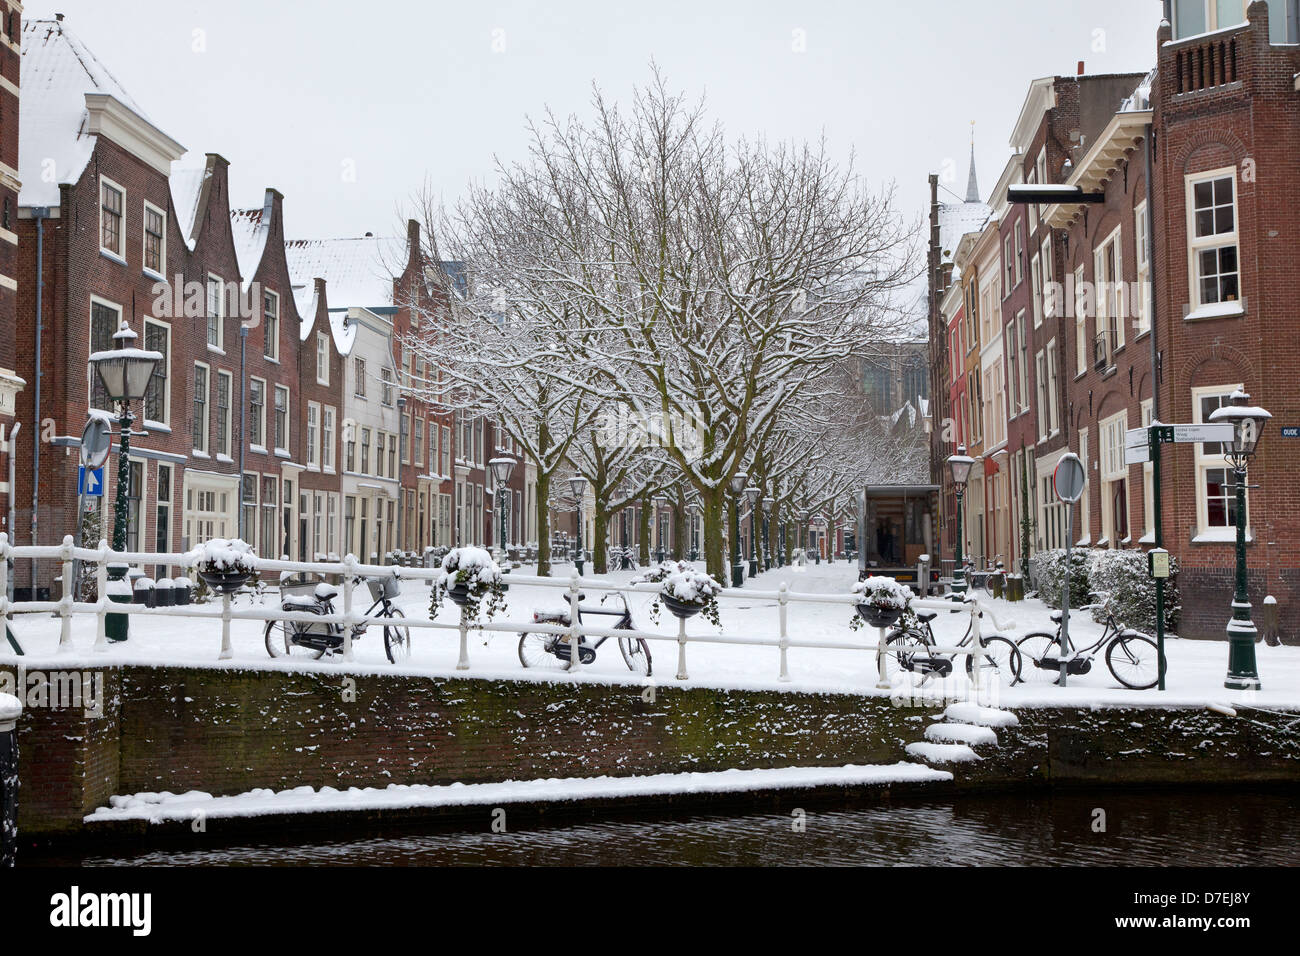 Snow in the streets of Leiden, Holland Stock Photo